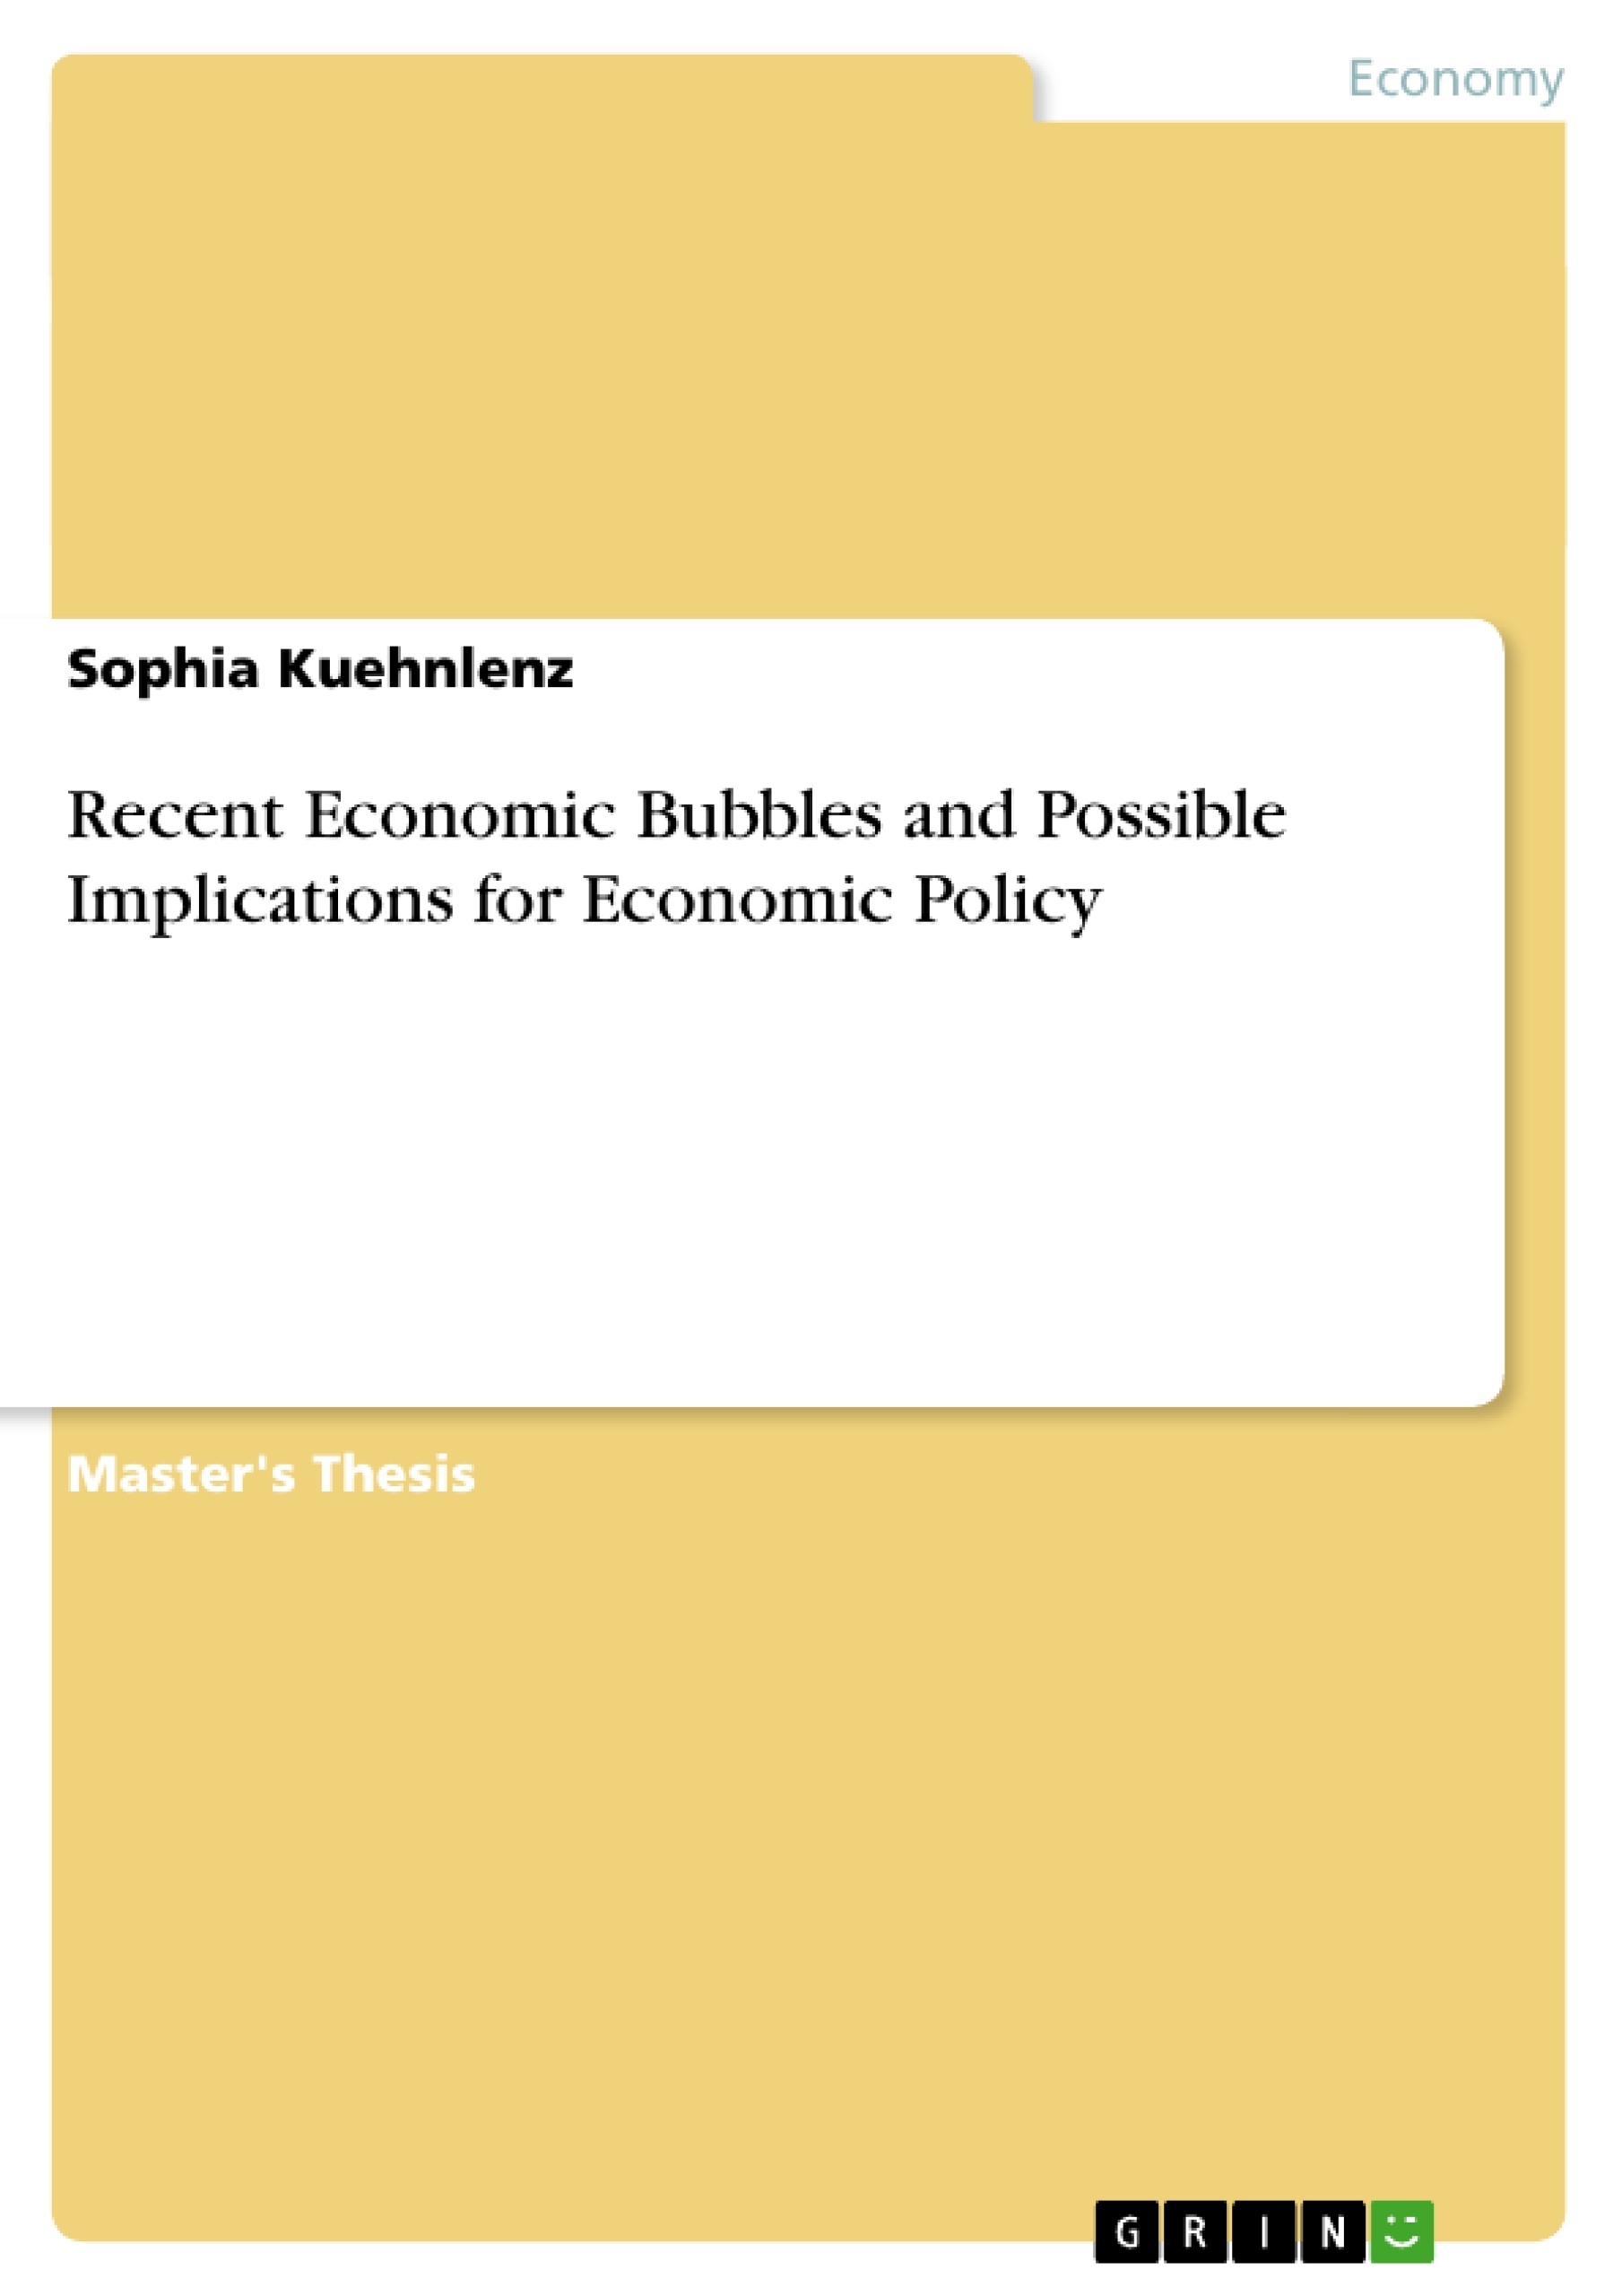 Title: Recent Economic Bubbles and Possible Implications for Economic Policy